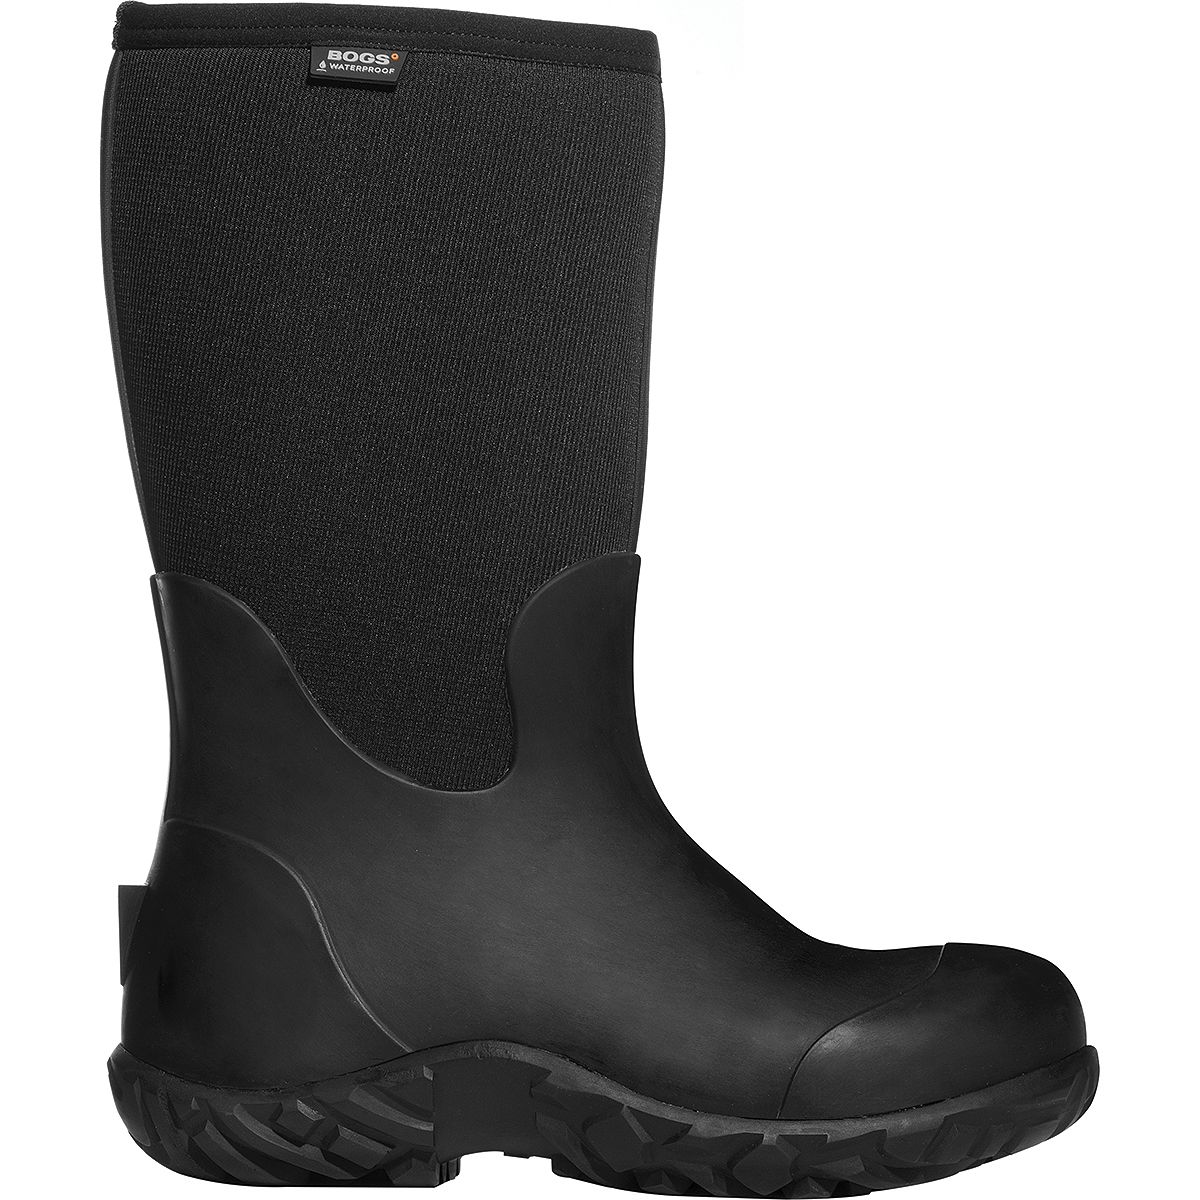 Bogs Workman Soft Toe Insulated Boot - Men's